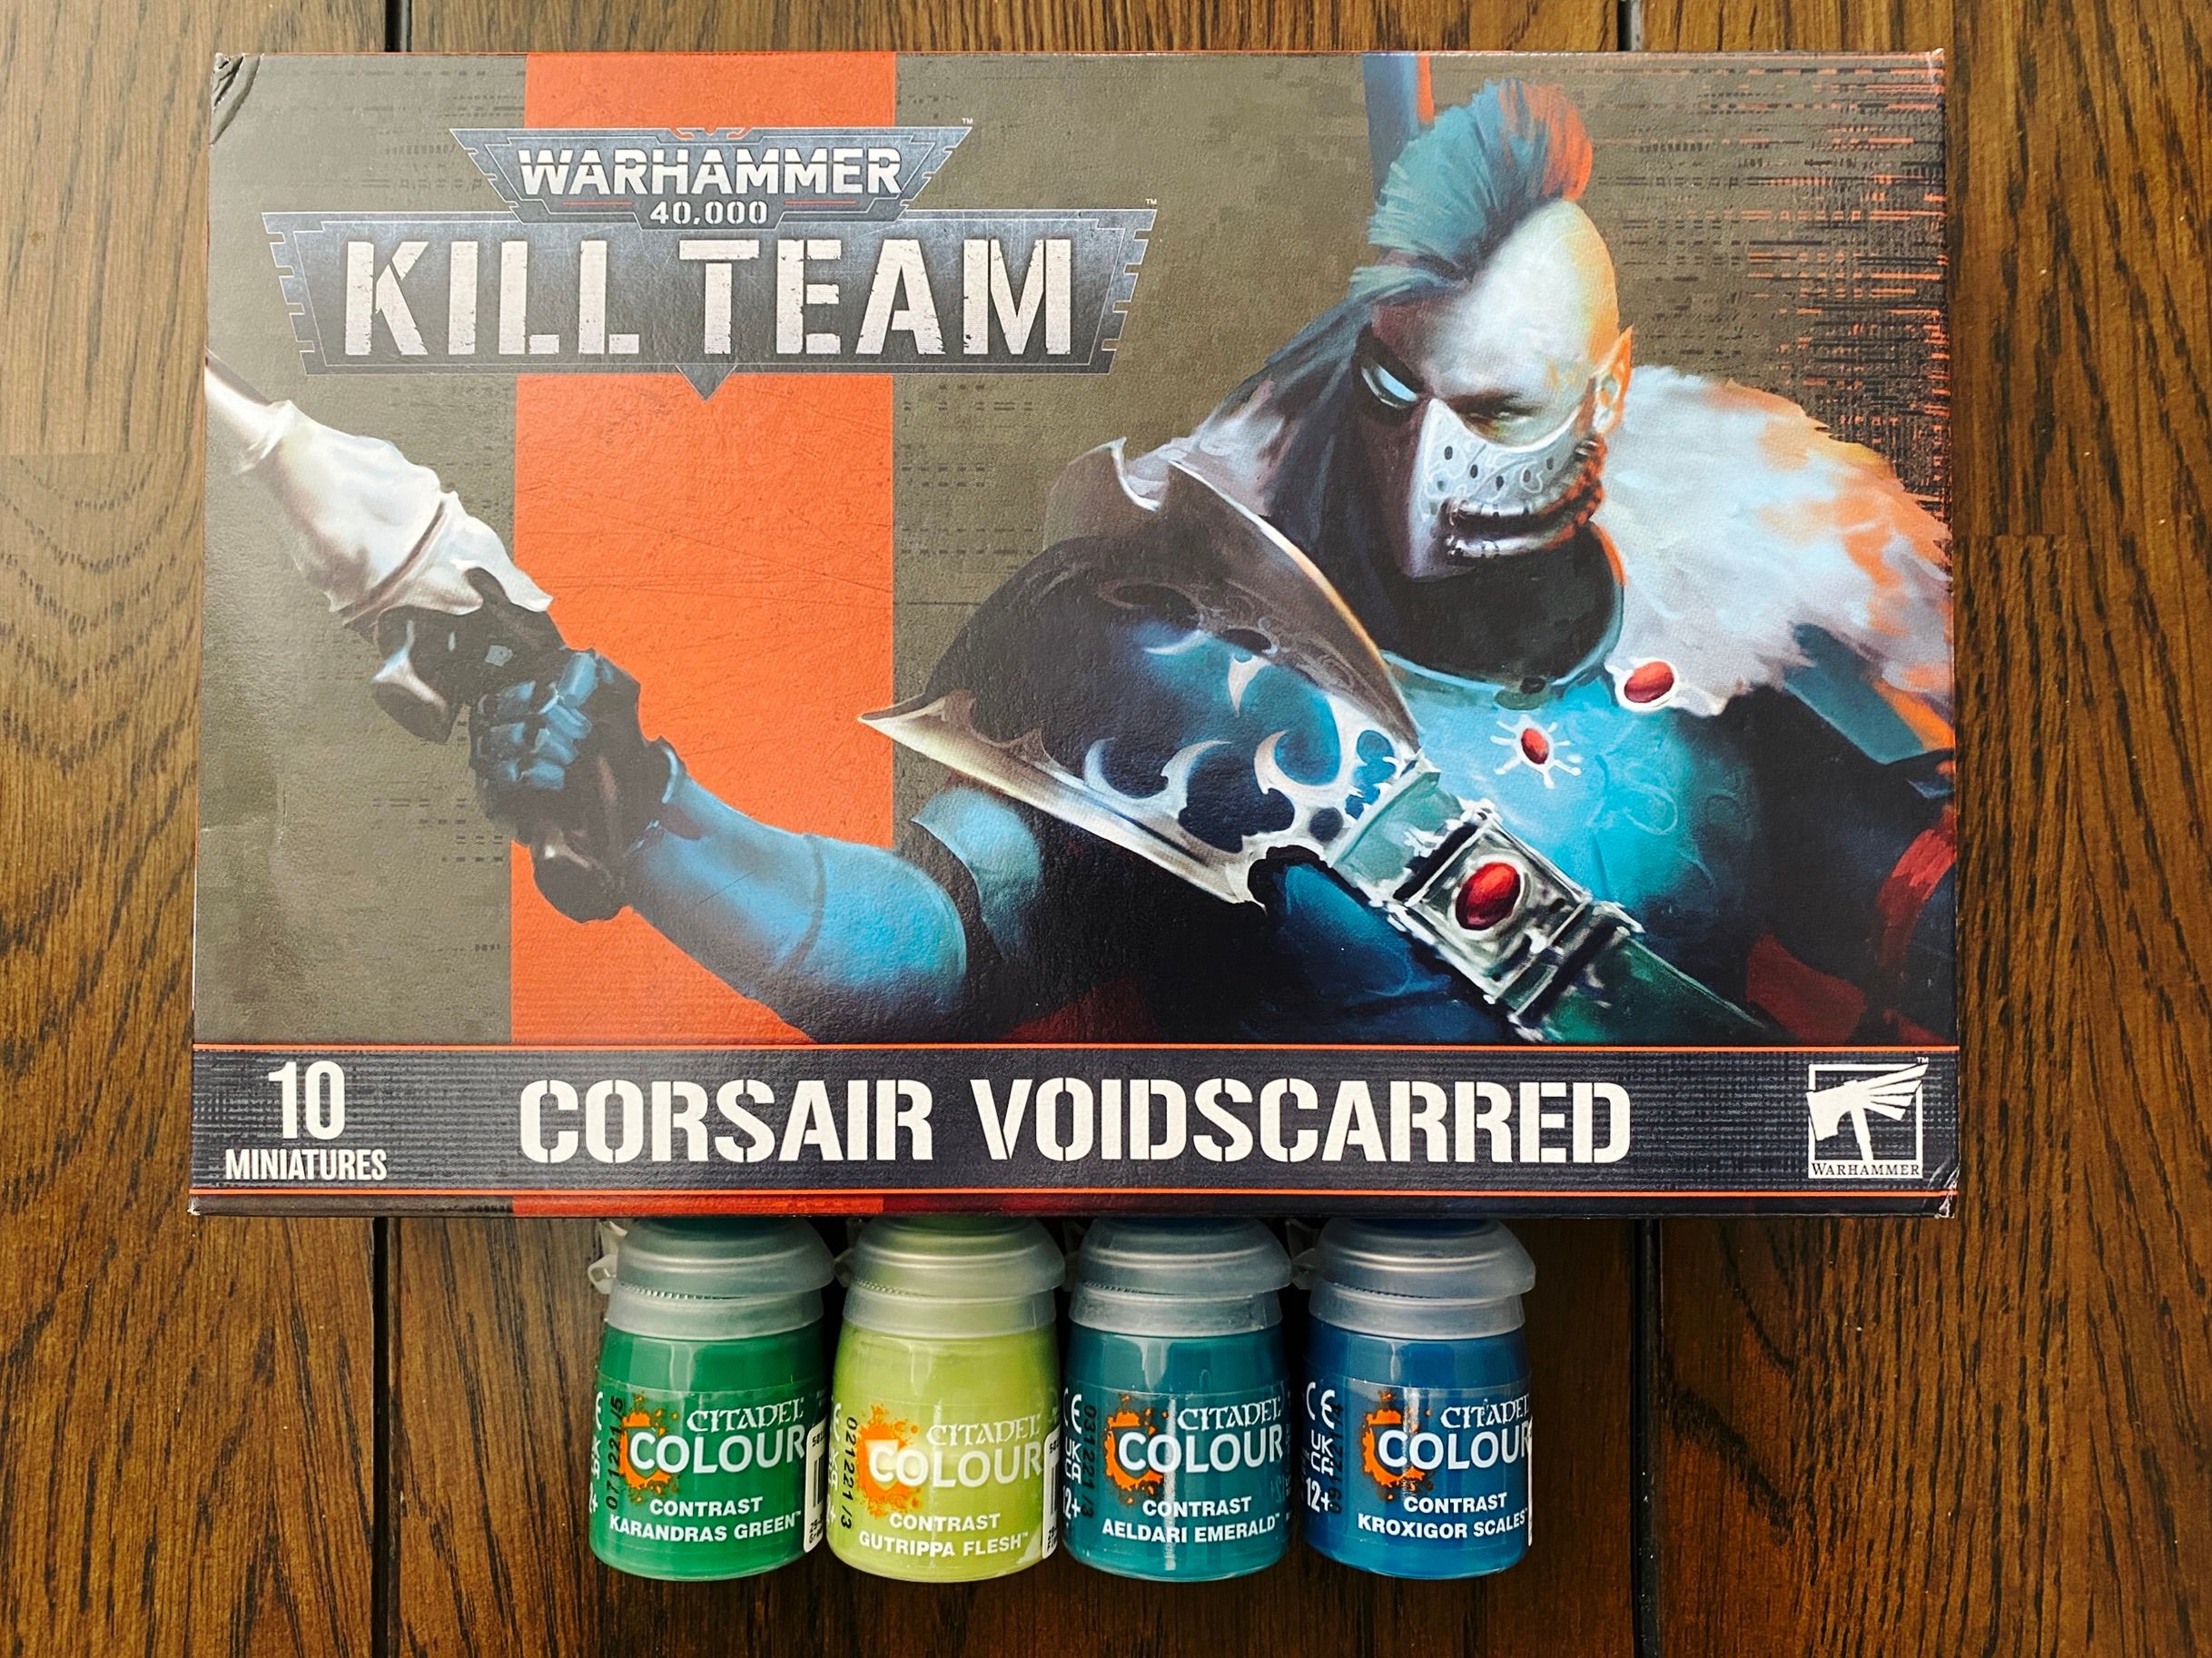 A photo of the Warhammer 40,000 Kill Team squad "Corsair Voidscarred", which are basically space elf pirates, and four pots of paint. The art on the front of the box is of one of the Voidscarred who has a turquoise mohawk and a breathing mask on, and is wearing elegant-looking turquoise armour. He's wielding sleek and elegant-looking bone-coloured pistol.